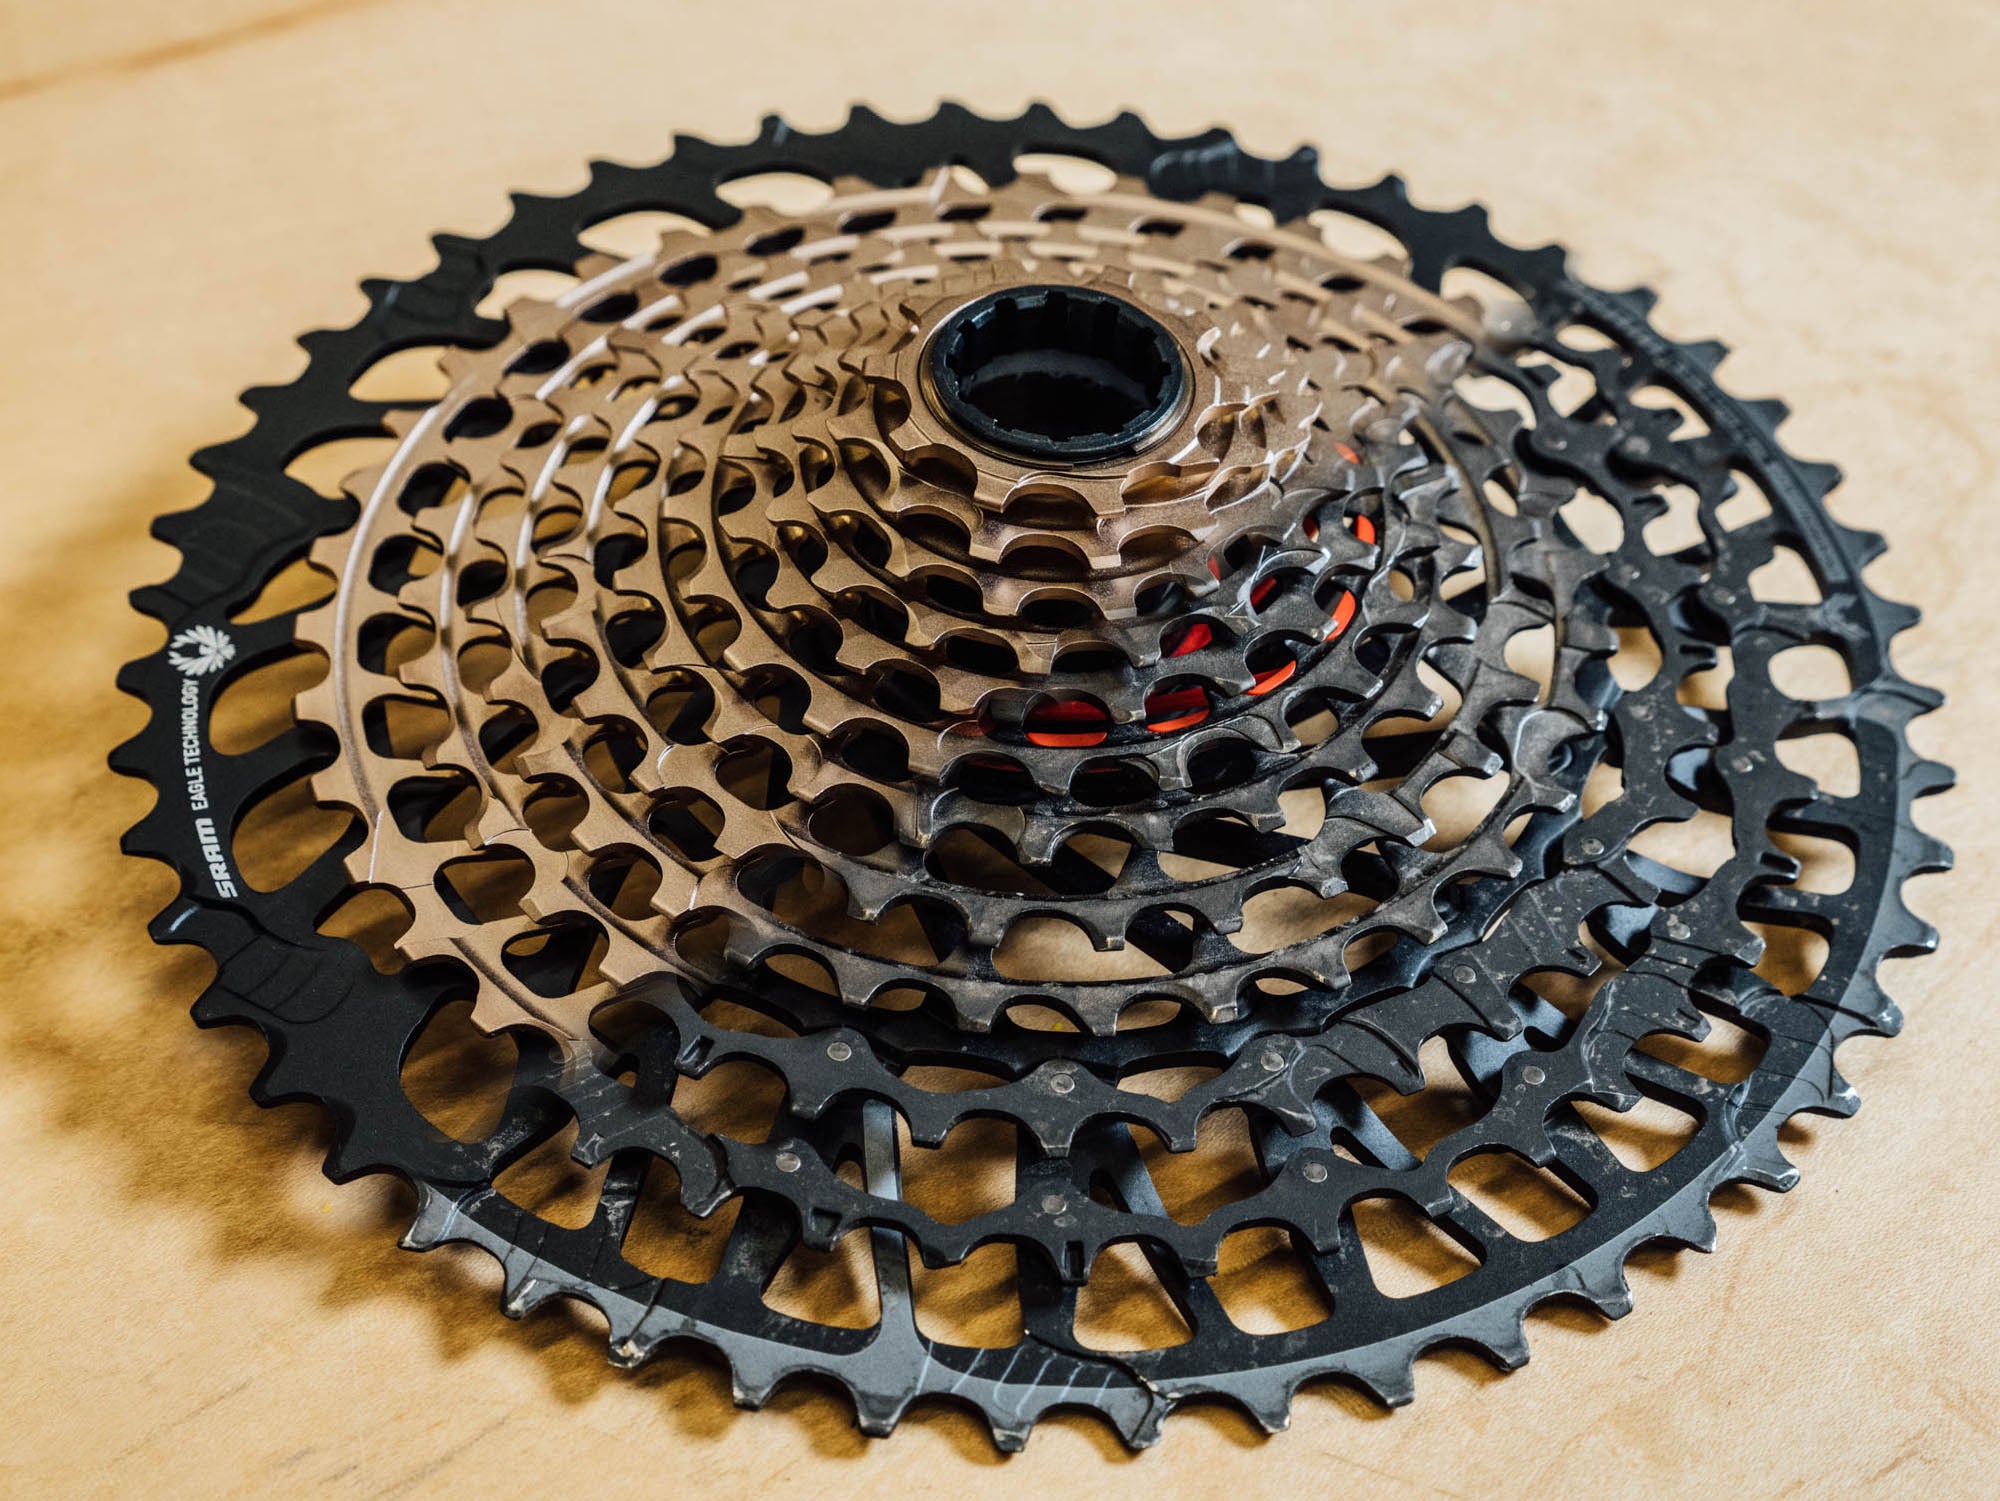 Note the greater number of shift ramps on the new X0 cassette (right) versus a typical Eagle cassette (left).